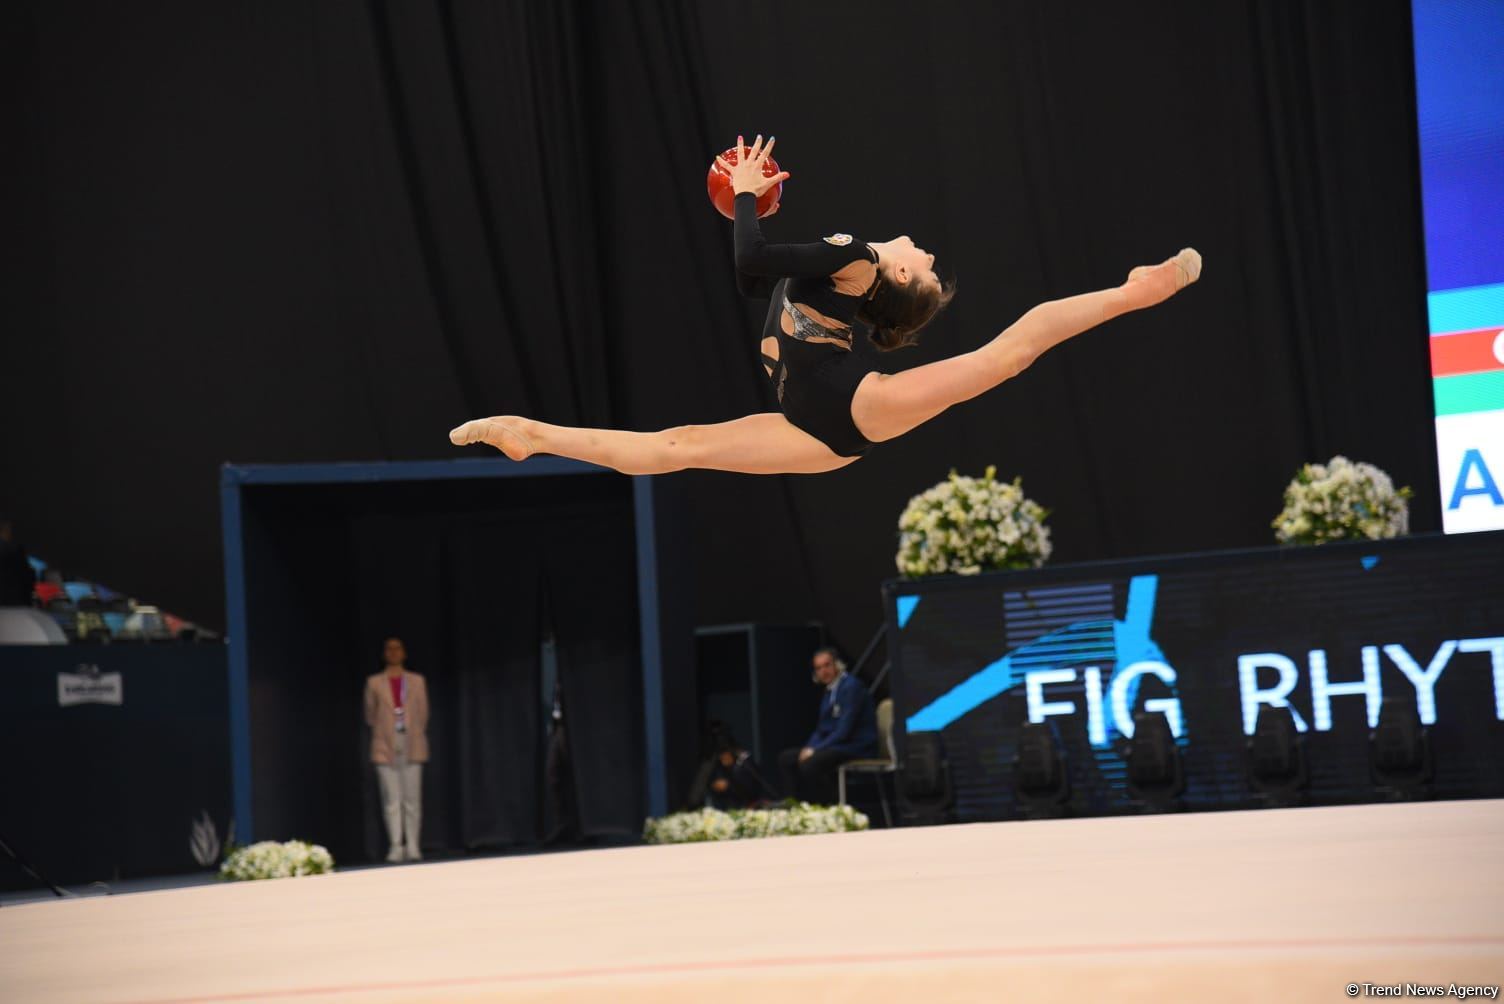 Azerbaijani gymnasts show first results in qualifiers of FIG World Cup in Baku (PHOTO)